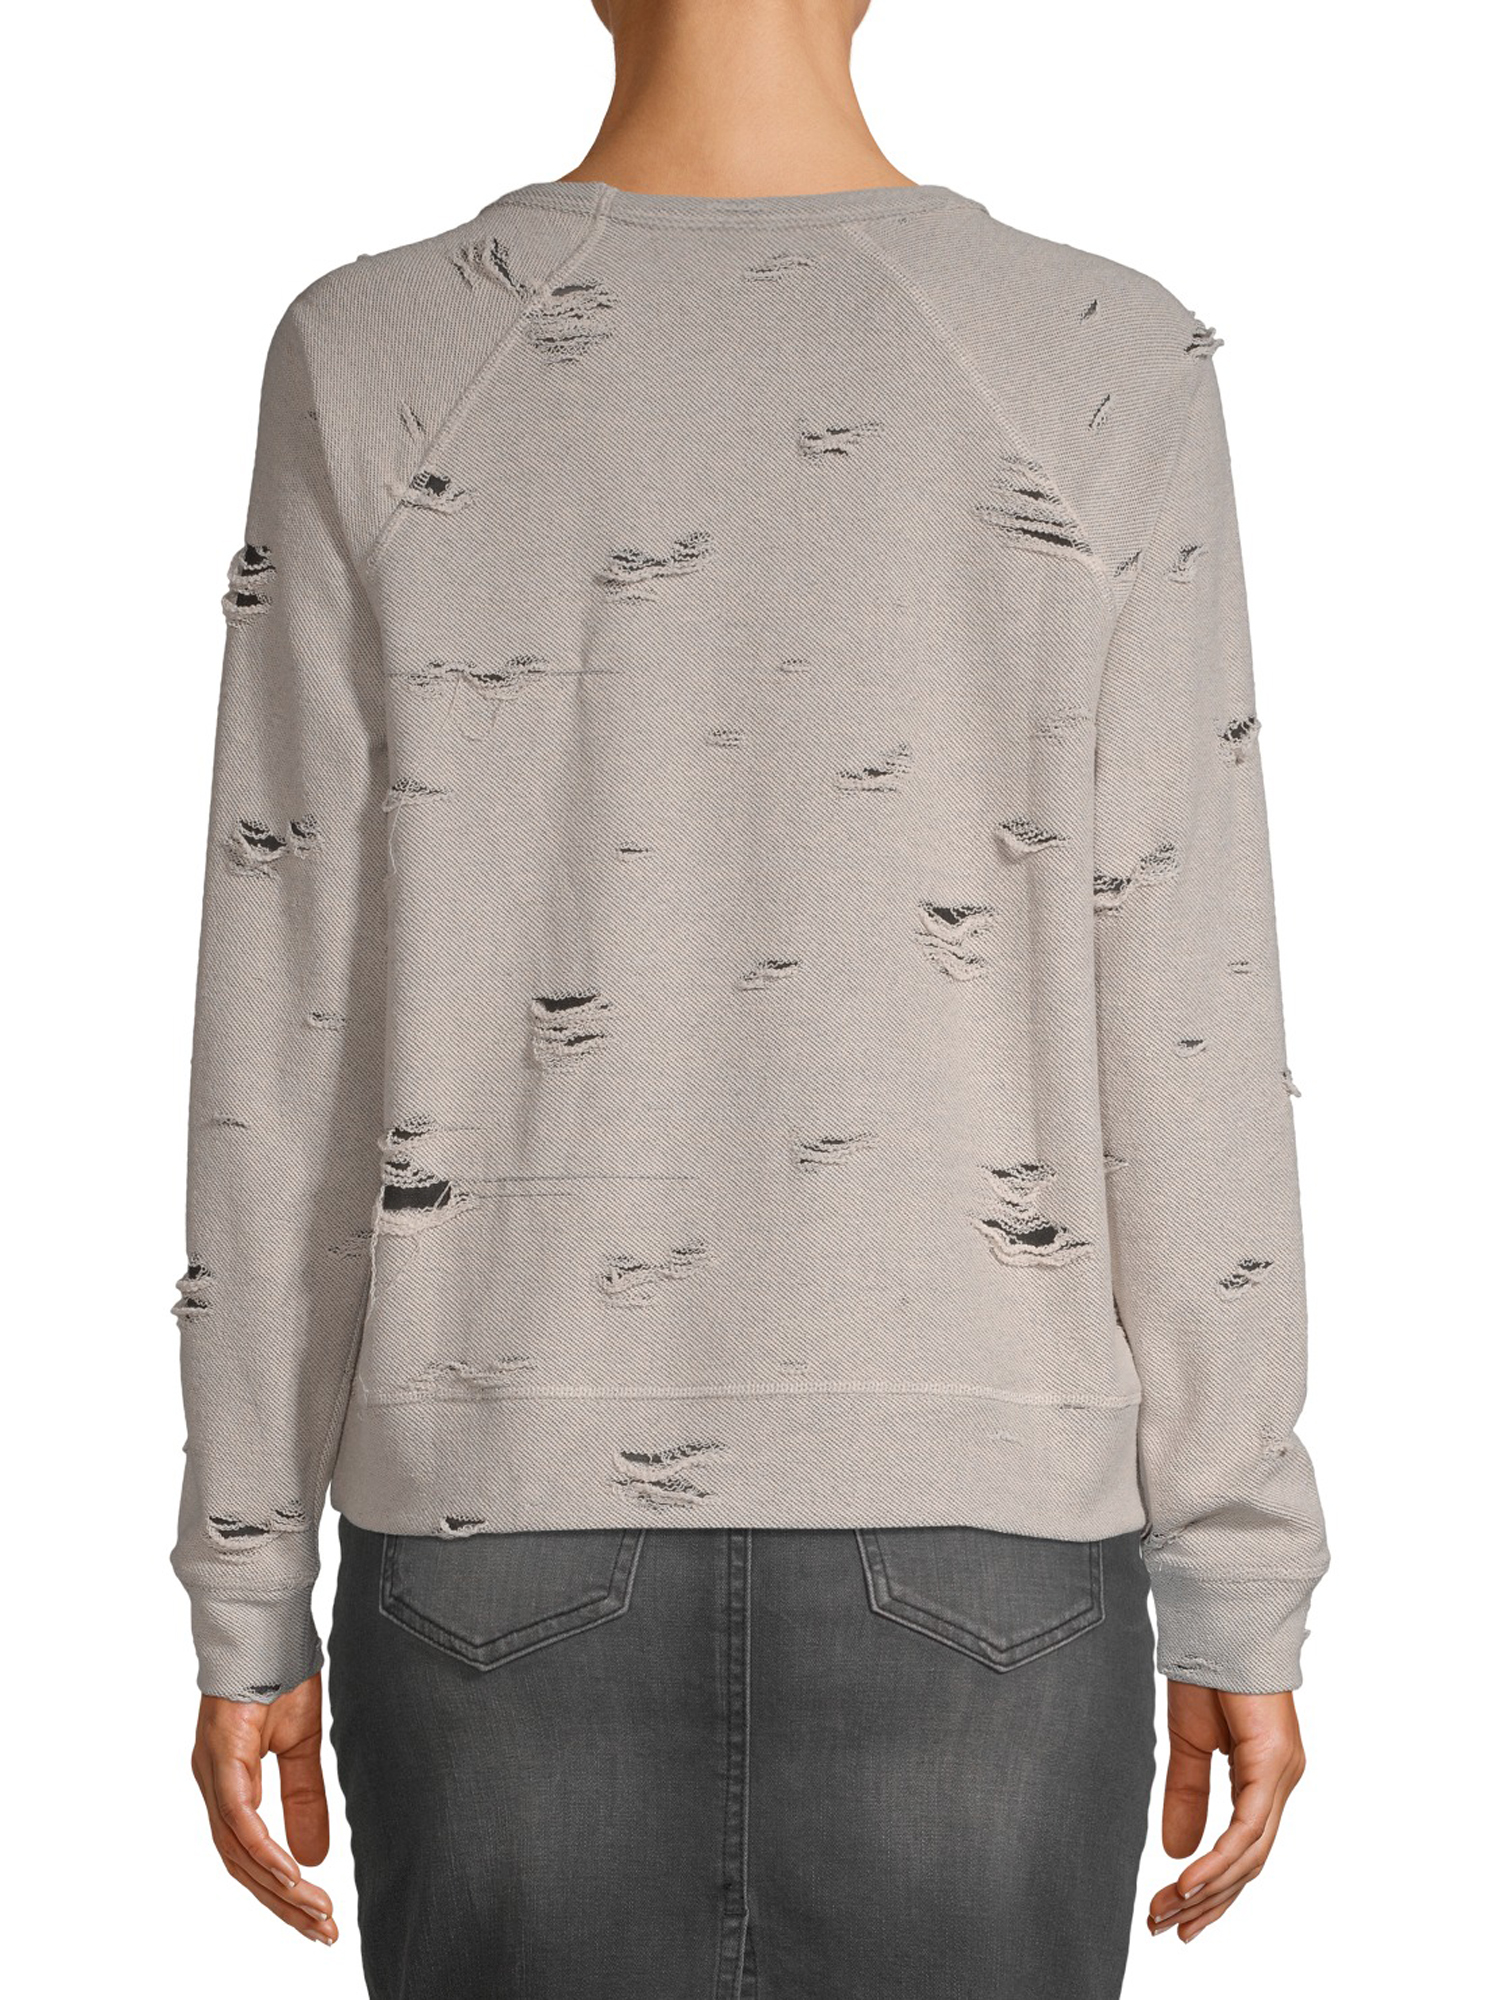 Scoop French Terry Distressed Sweatshirt Women's M - image 3 of 7